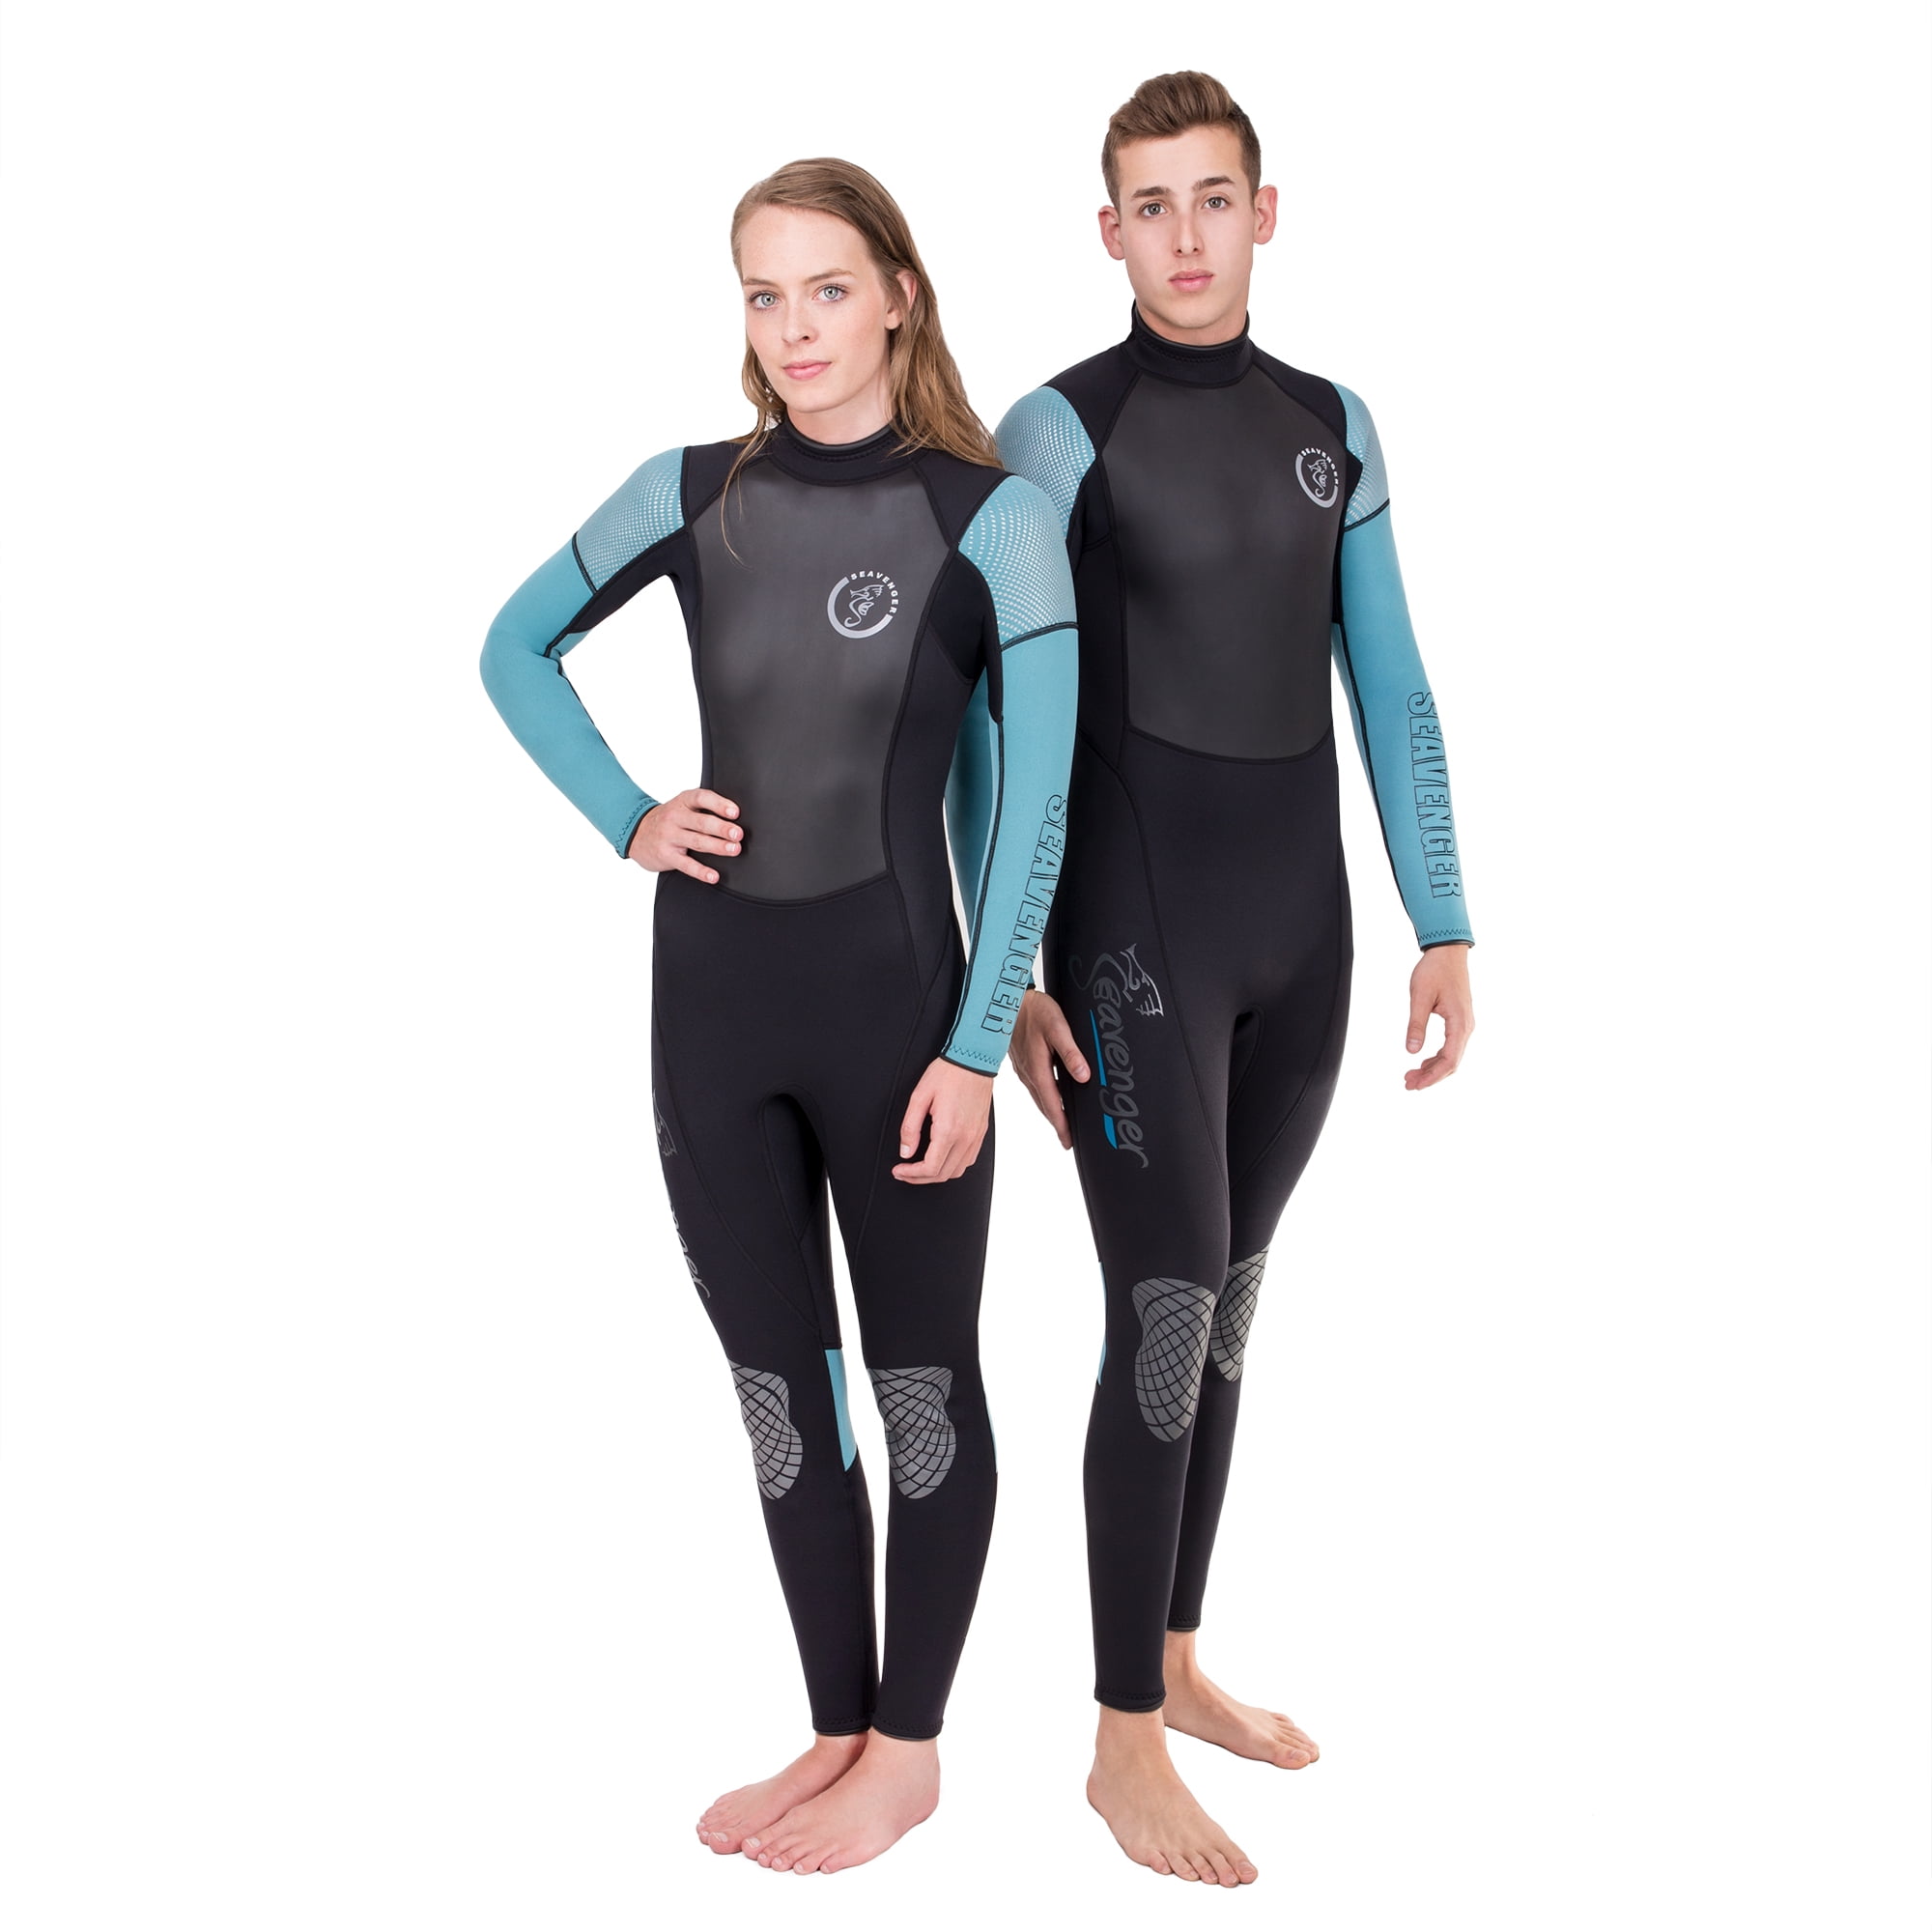 Seavenger Women’s Fit 3mm Shorty Wetsuit with Rubberized Stomach 